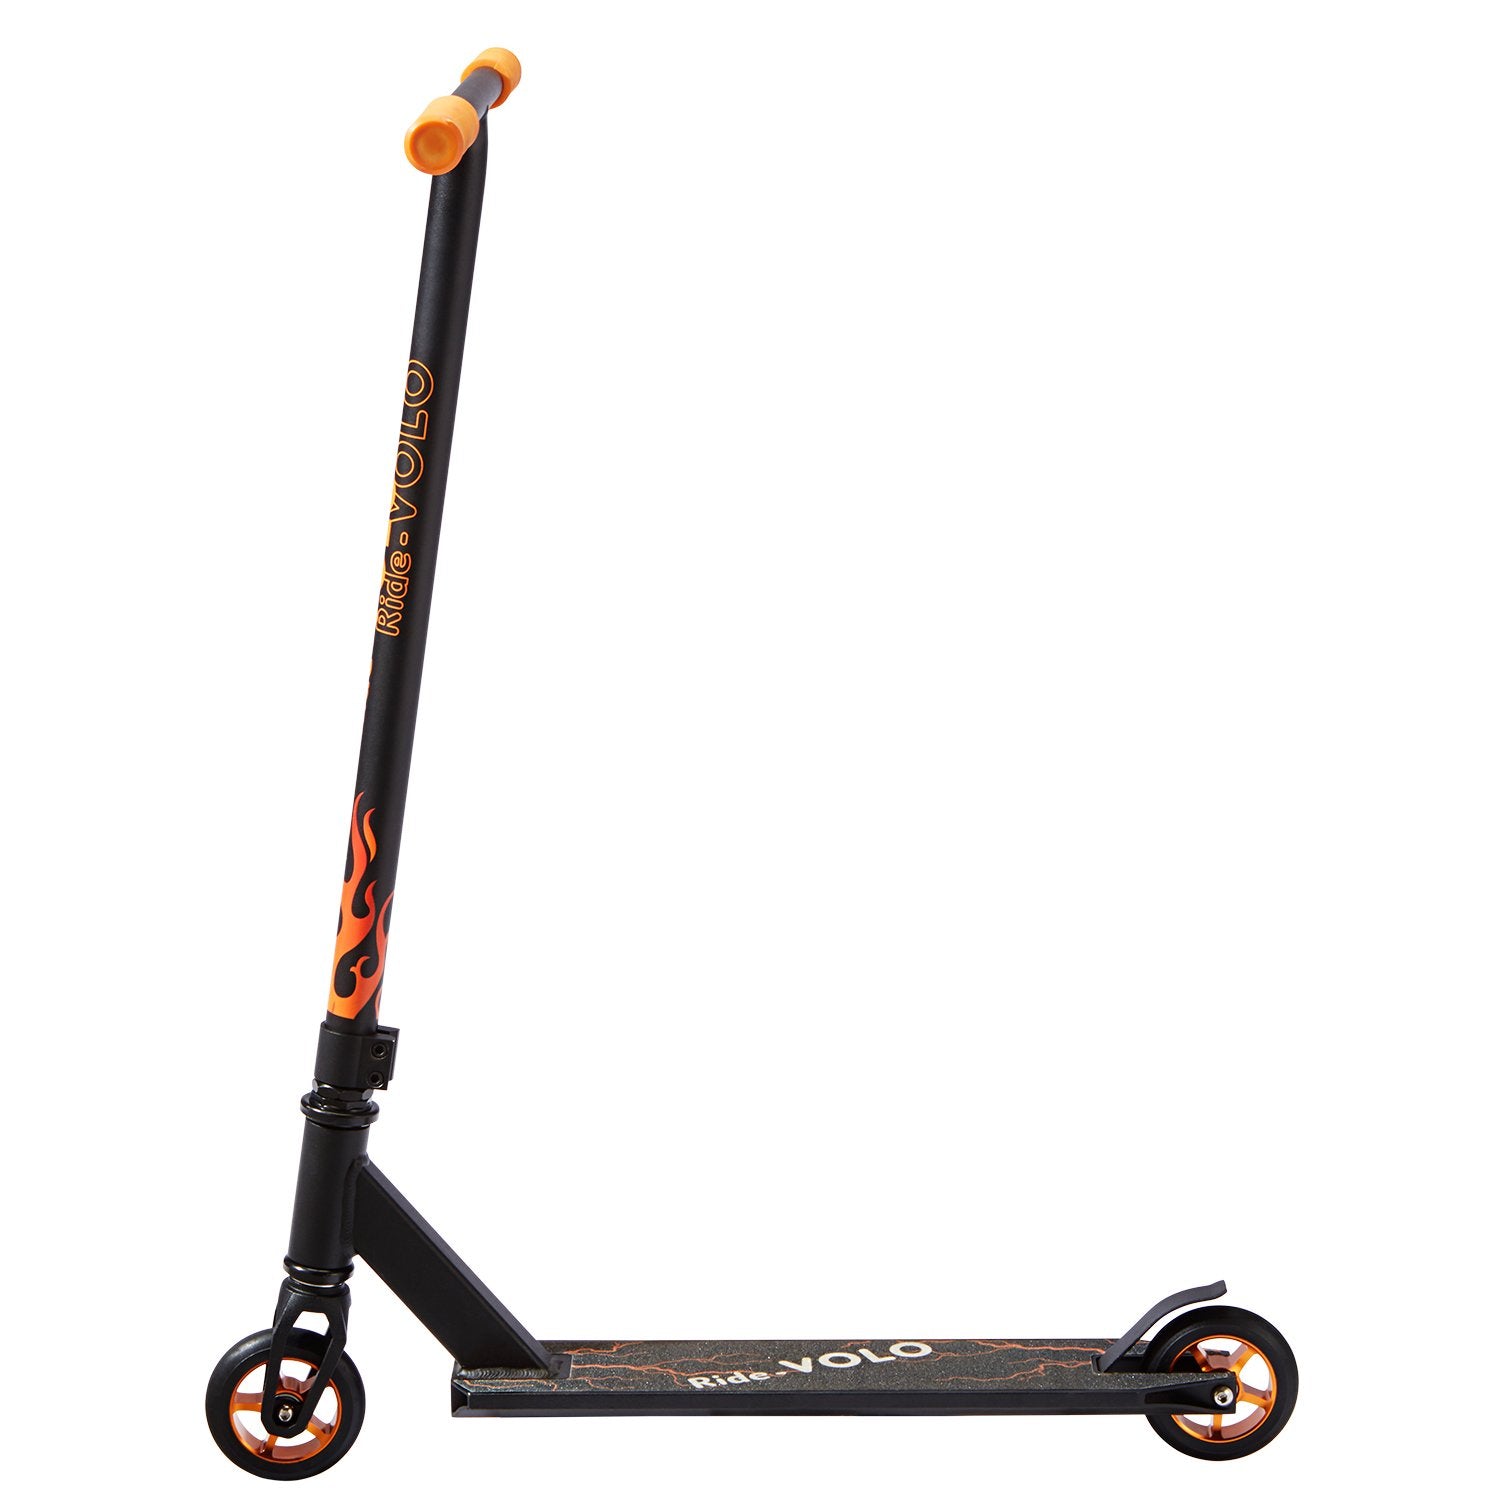 T01 stunt scooter side image